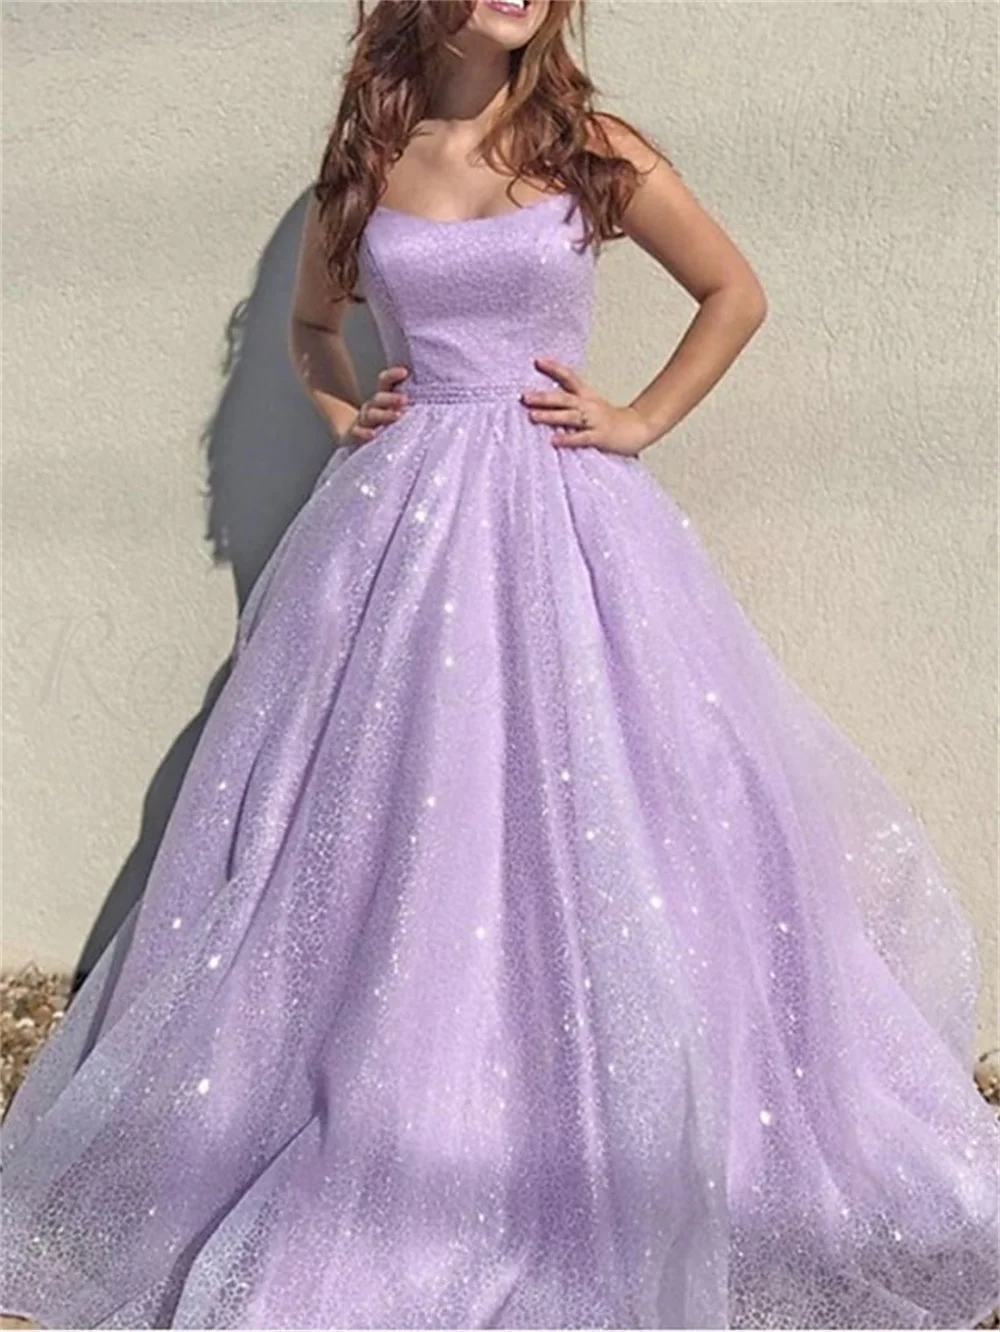 

A-Line Sparkle Sexy Engagement Prom Birthday Dress Strapless Sleeveless Sweep / Brush Train Sequined with Pleats Slit 2022